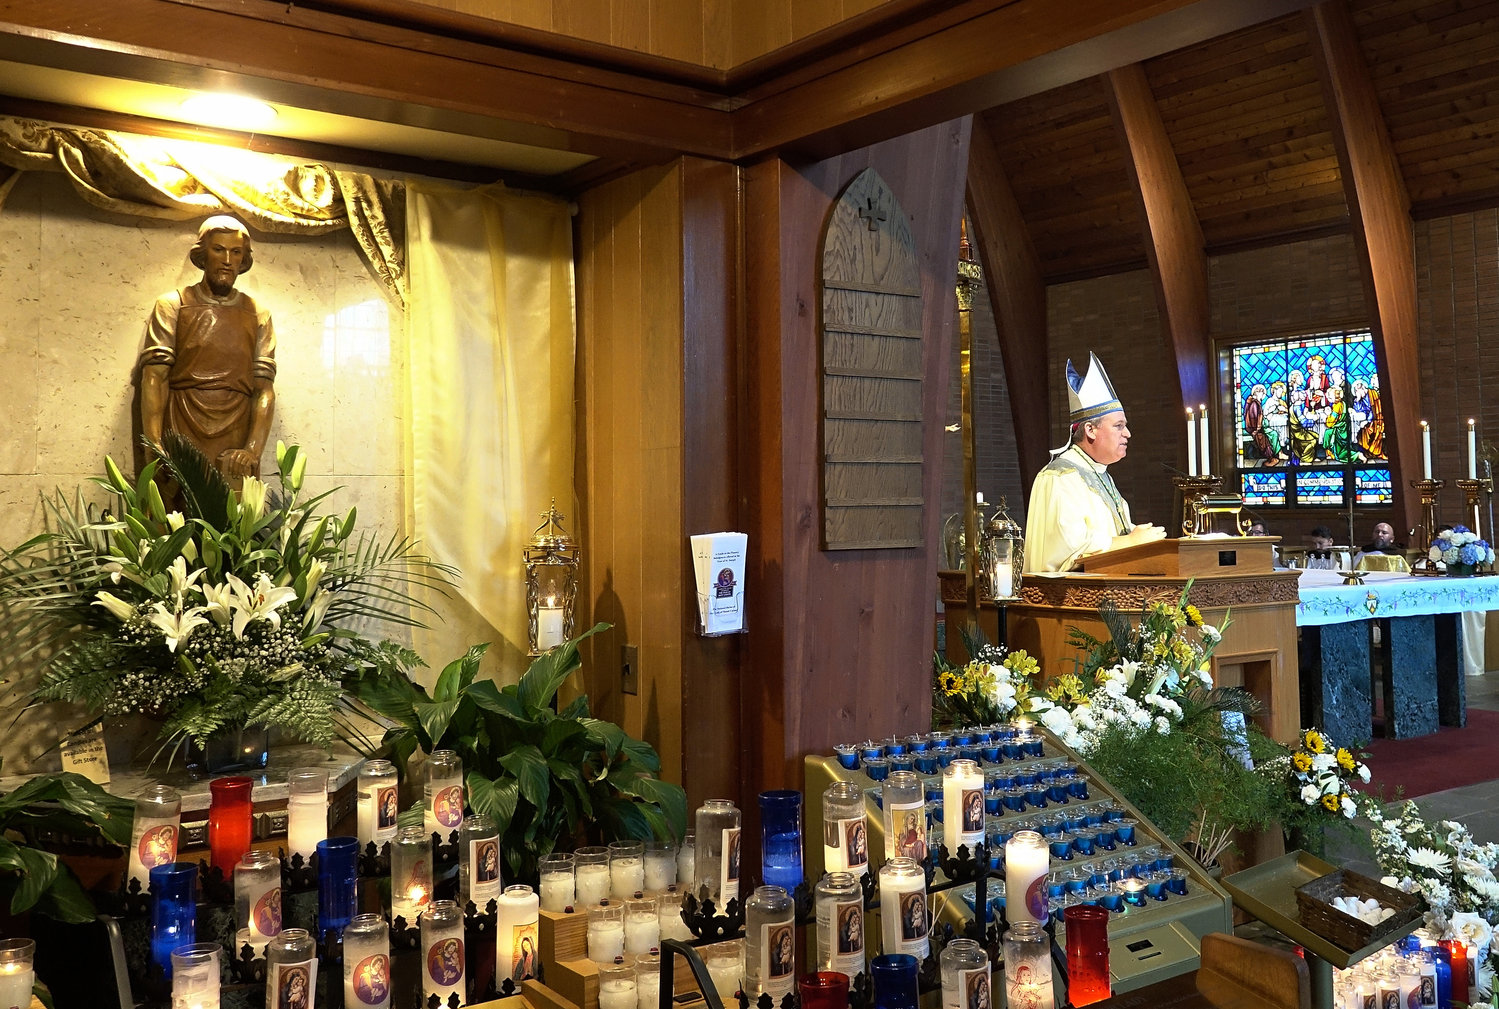 Bishop Kevin Sweeney of the Diocese of Paterson, N.J., offered a morning Mass. Lilies and candles surround a statue of St. Joseph, chaste spouse of Mary and foster father of Jesus, as the universal Church celebrates the Year of St. Joseph, promulgated by Pope Francis.